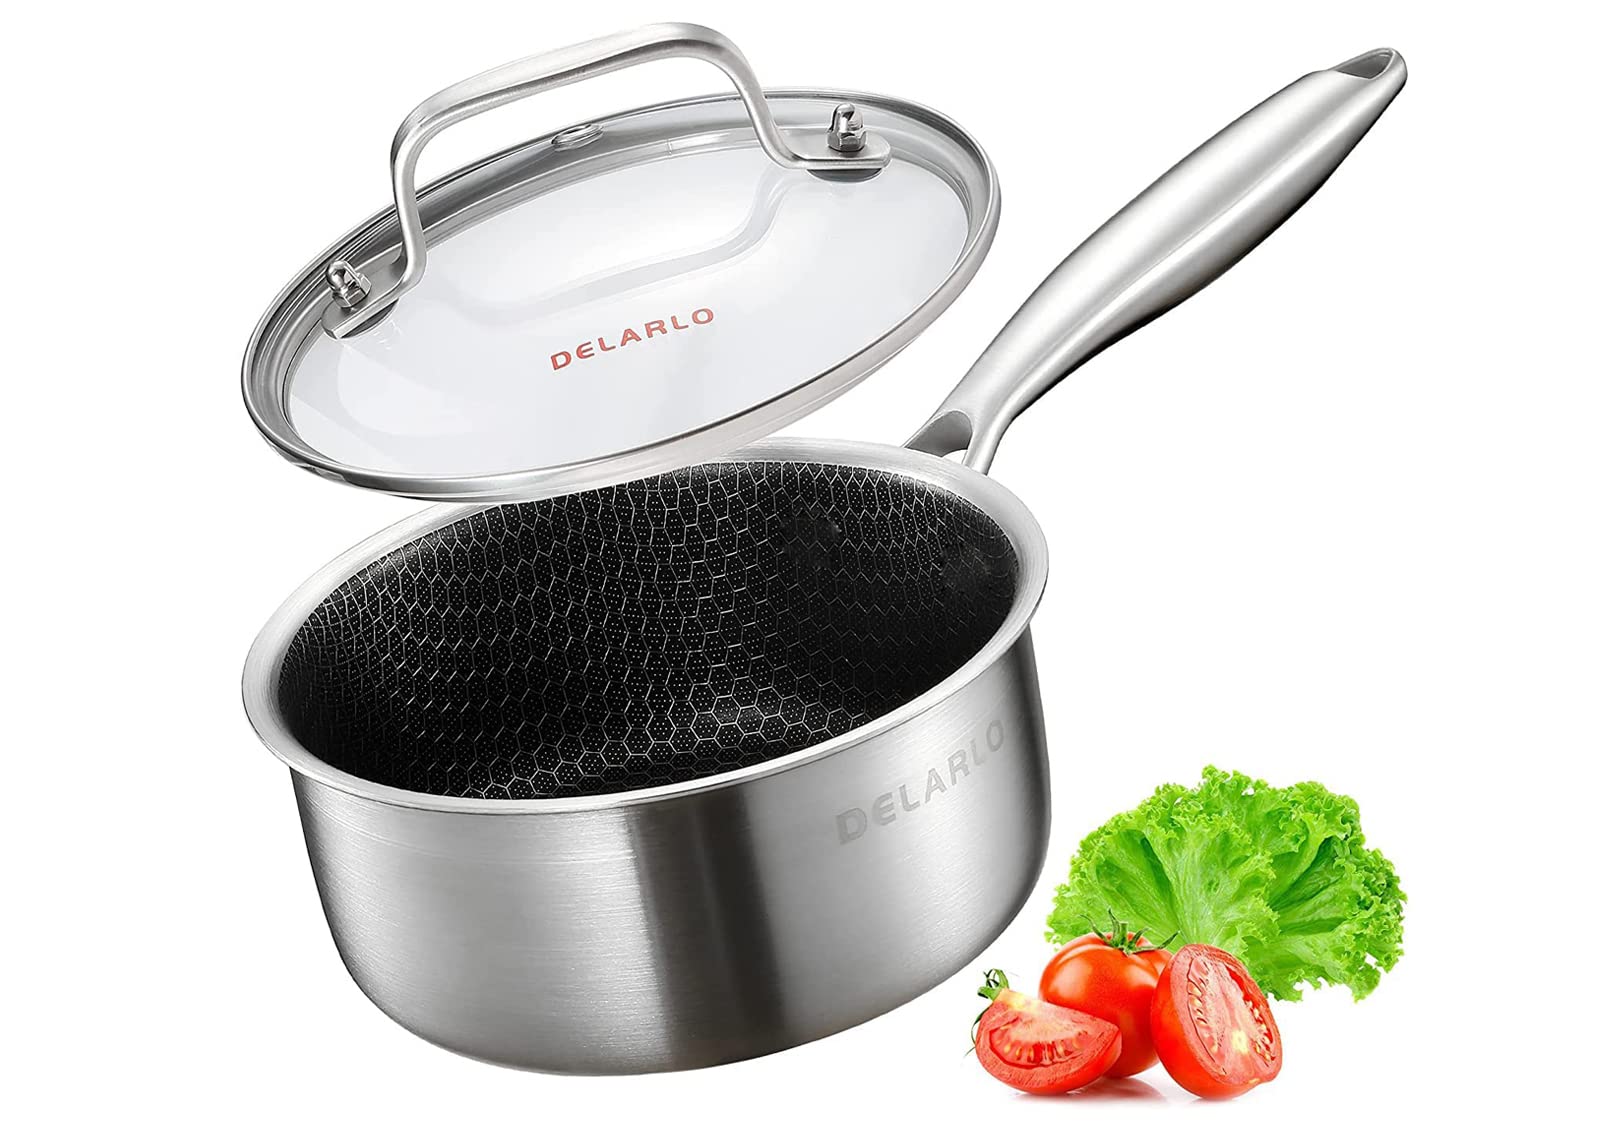 Delarlo Sauce Pot, Saucepan Hybrid Stainless Steel With Glass Lid, 188 Tri-Ply Stainless Steel Sauce Pan, Nonstick Honeycomb Ind